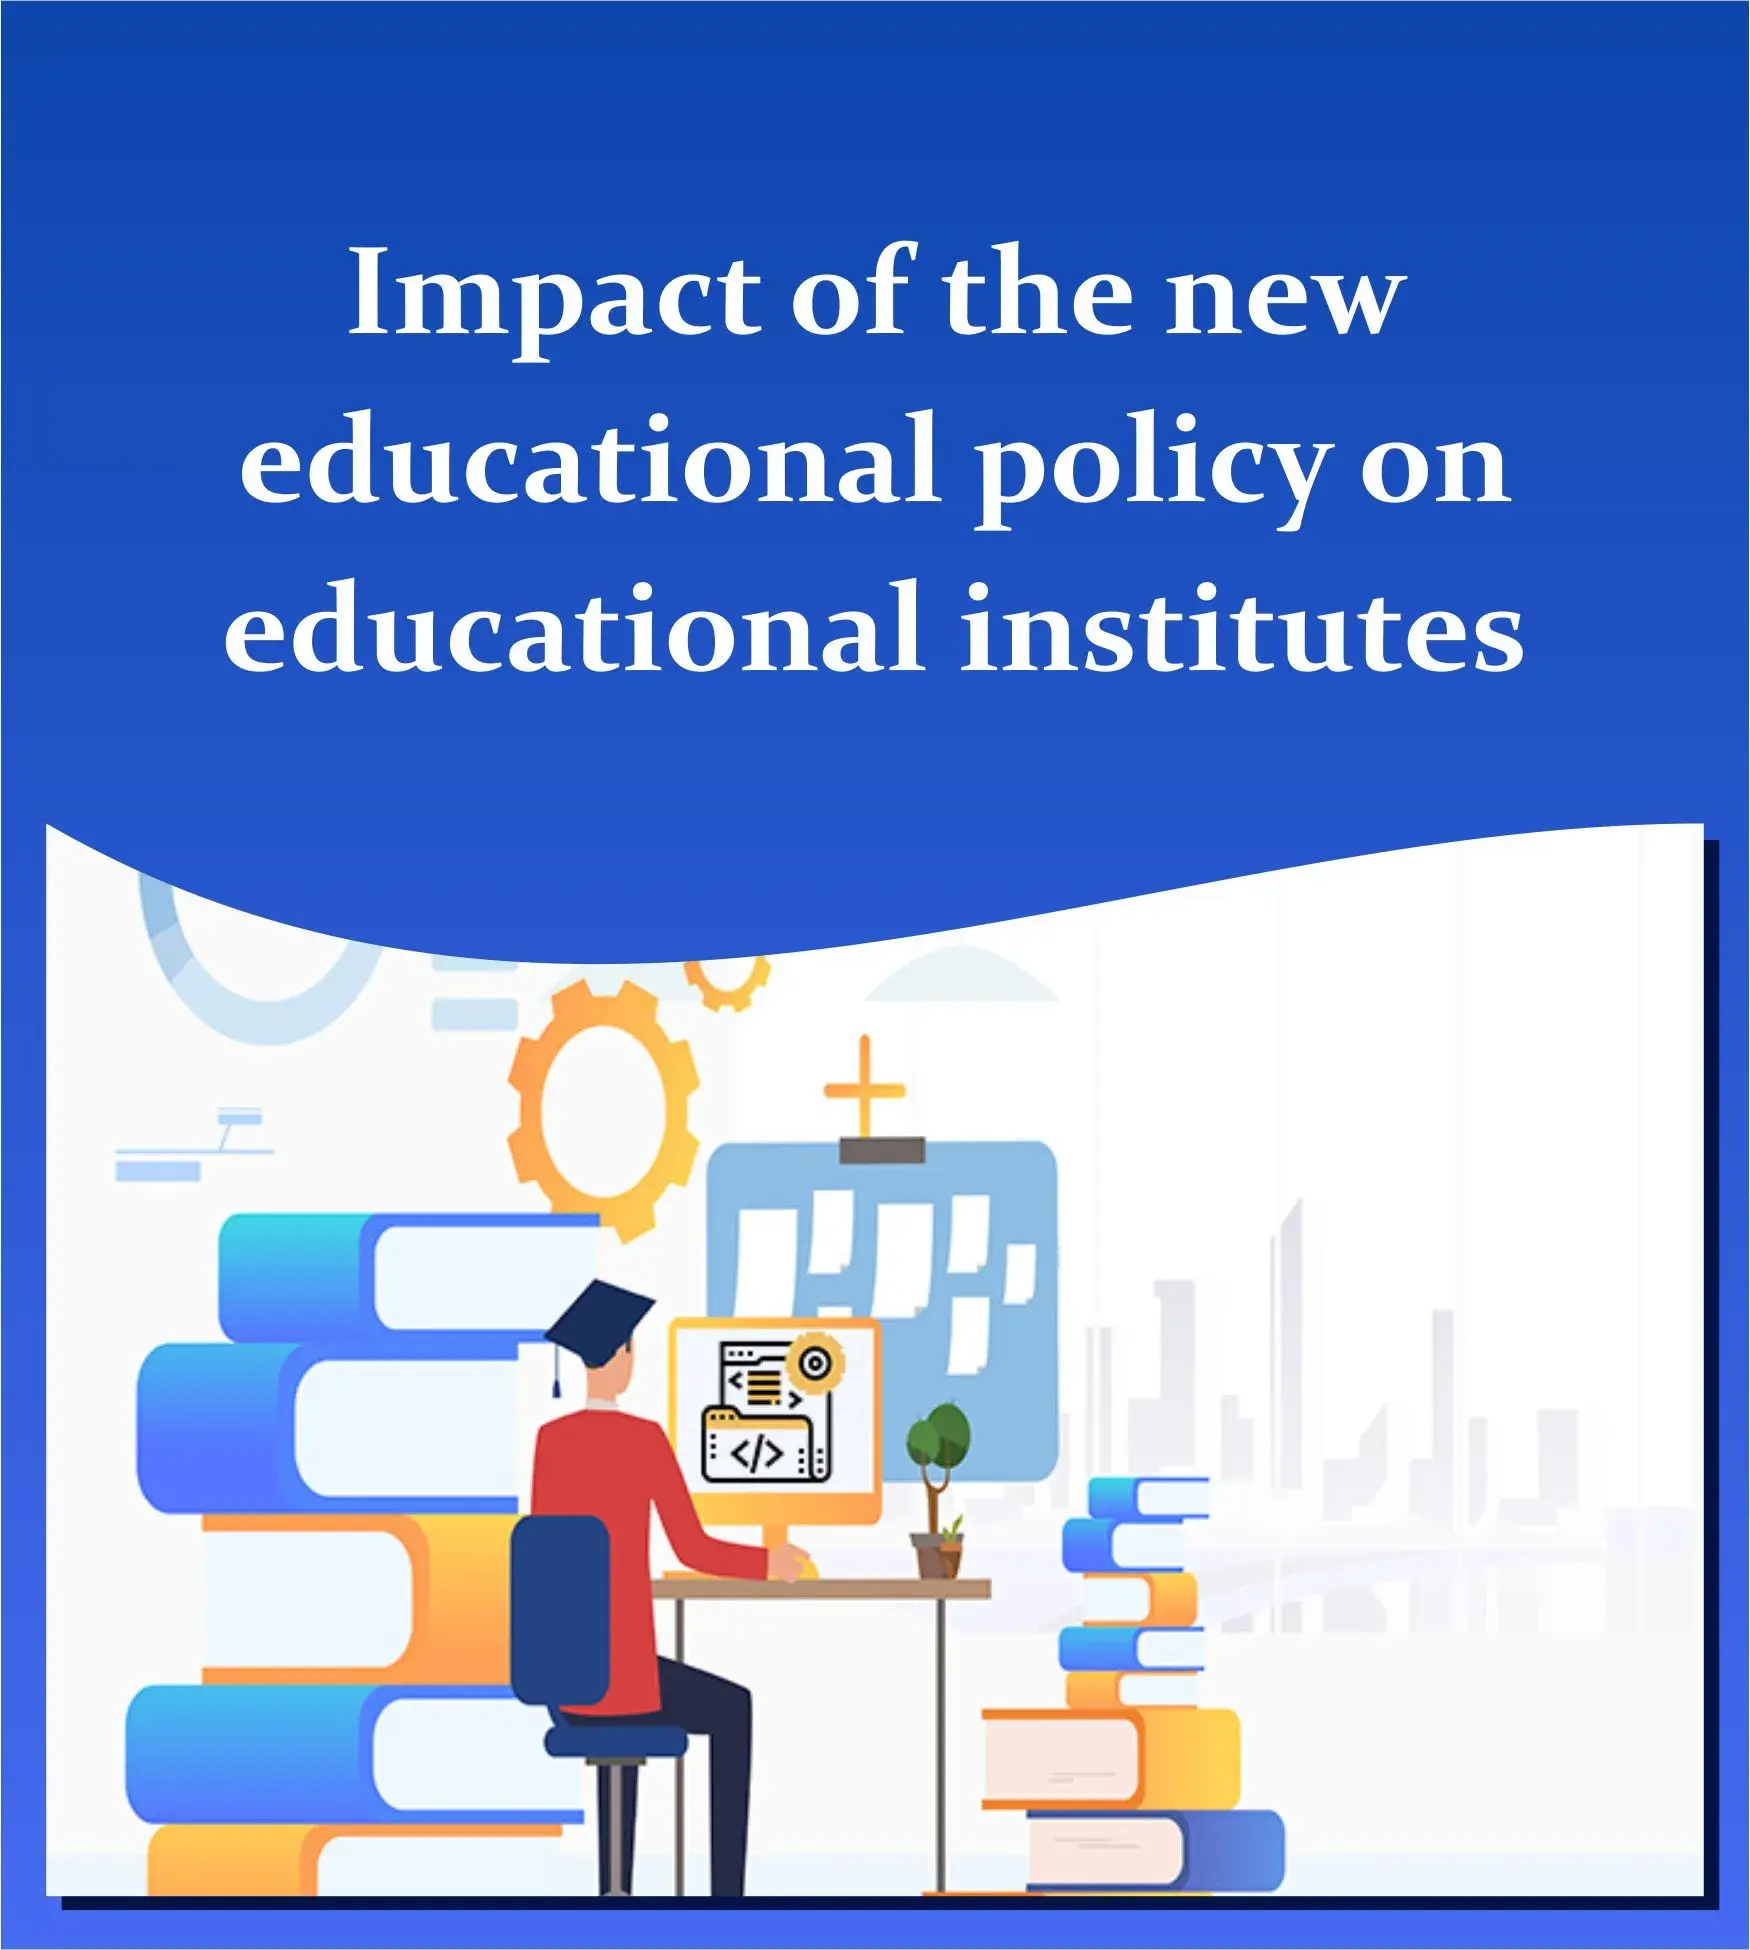 Institute-Management-System-Software-and-Education-Policy